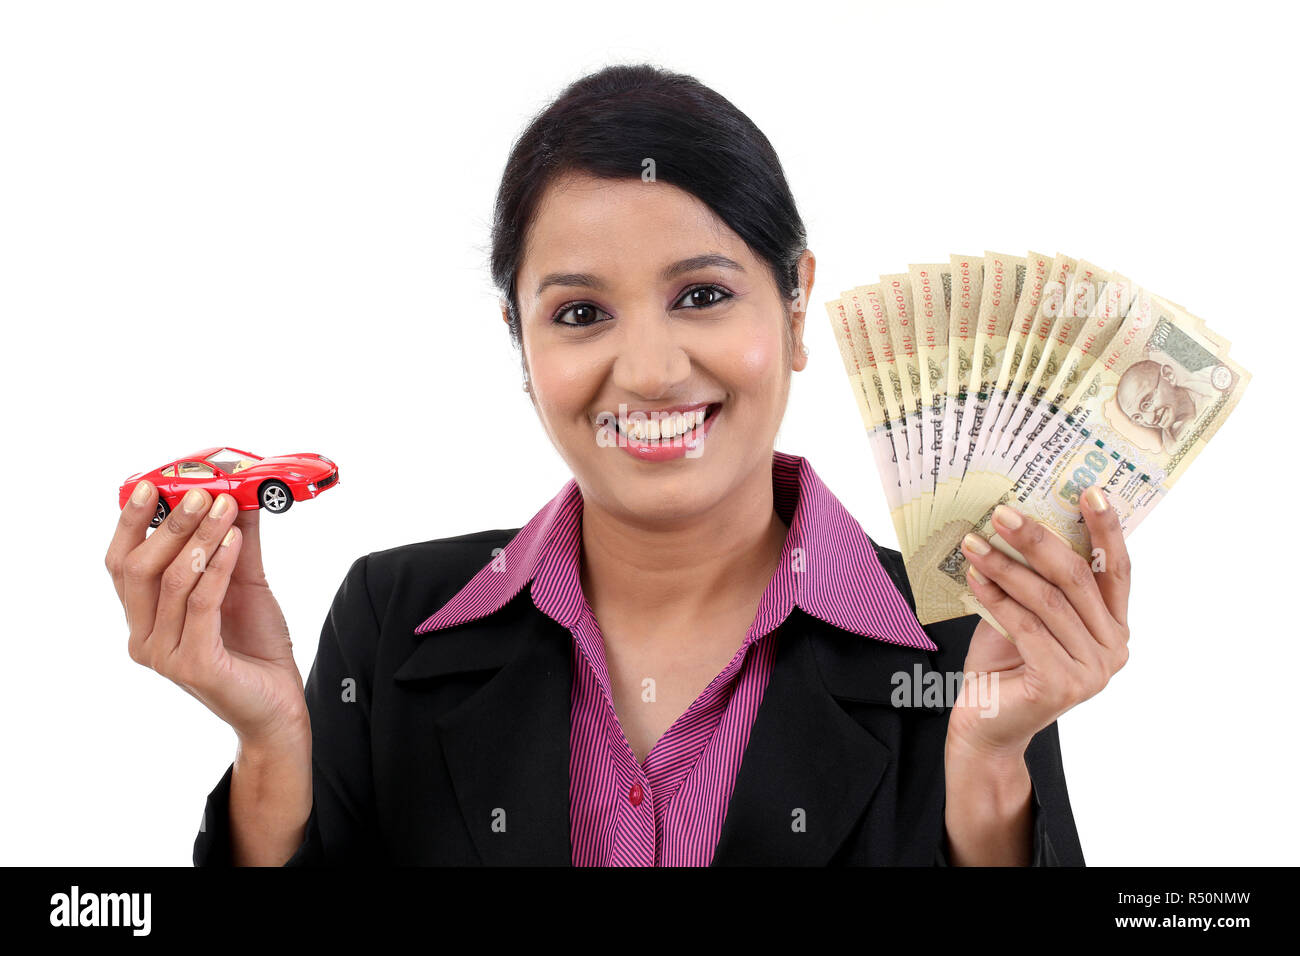 Cheerful business woman with money and toy car Stock Photo